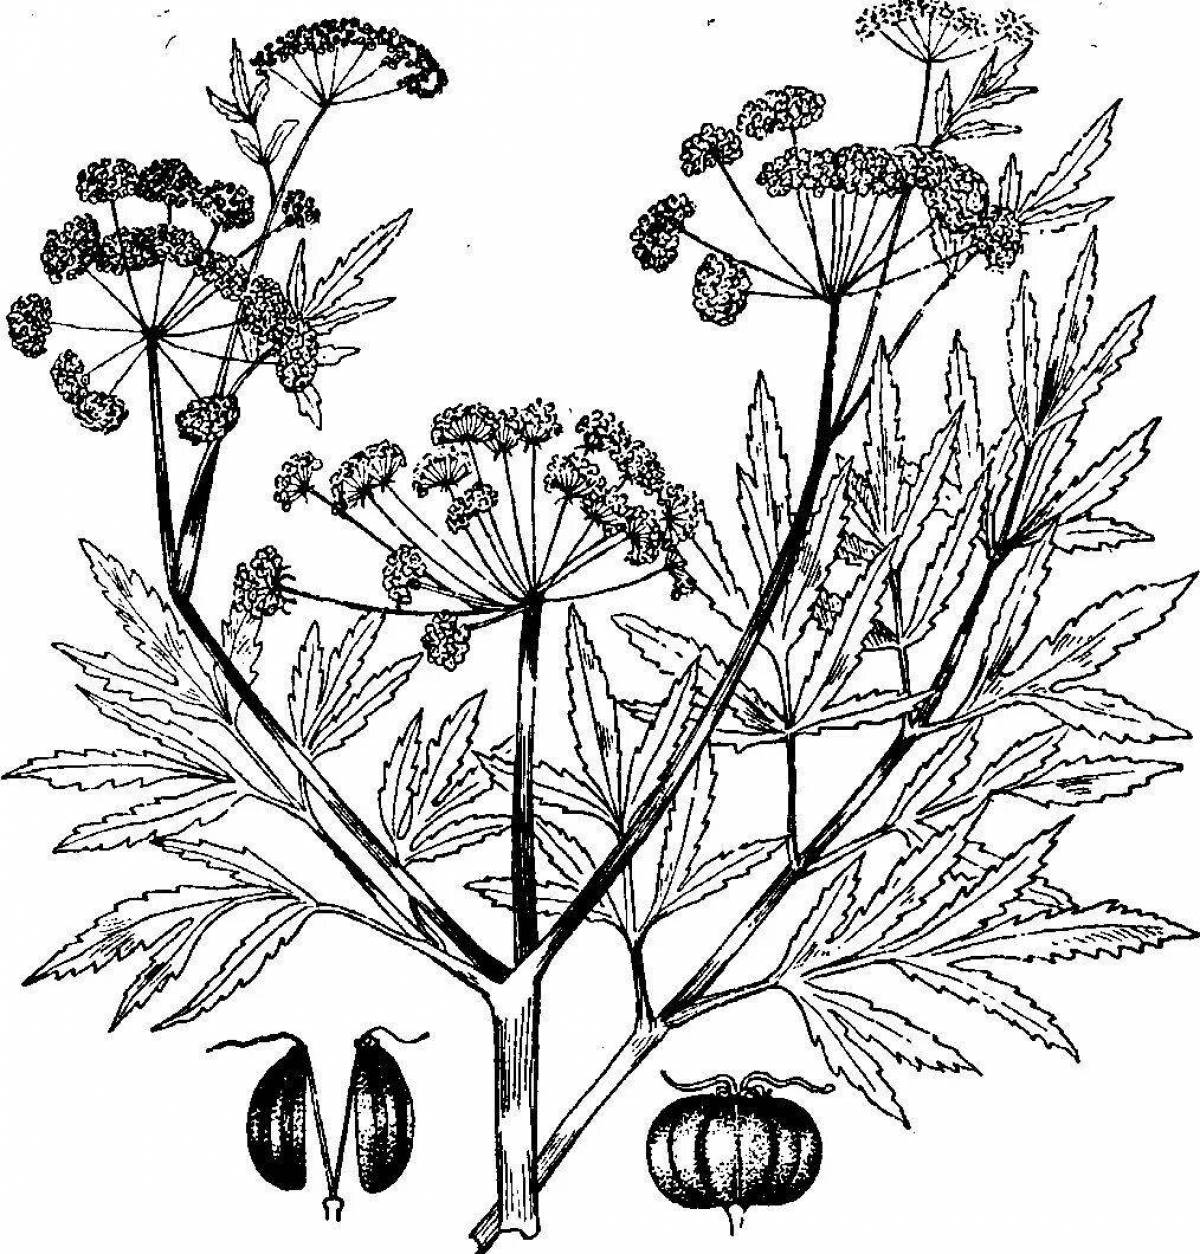 Coloring pages with poisonous plants for children